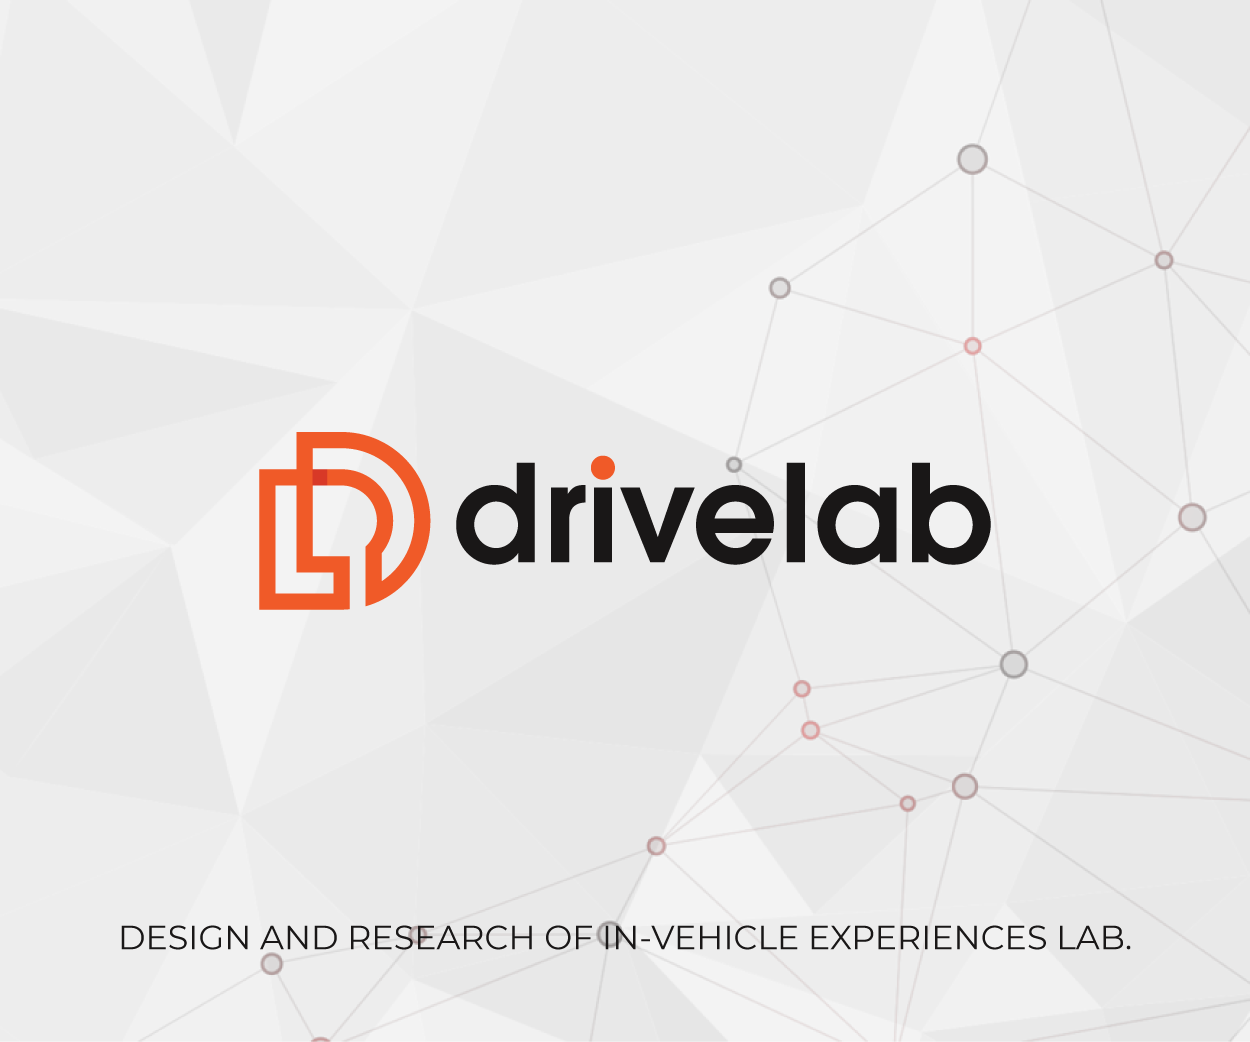 DriveLab the Design and Research of In-Vehicle Experiences Lab Logo Design Image